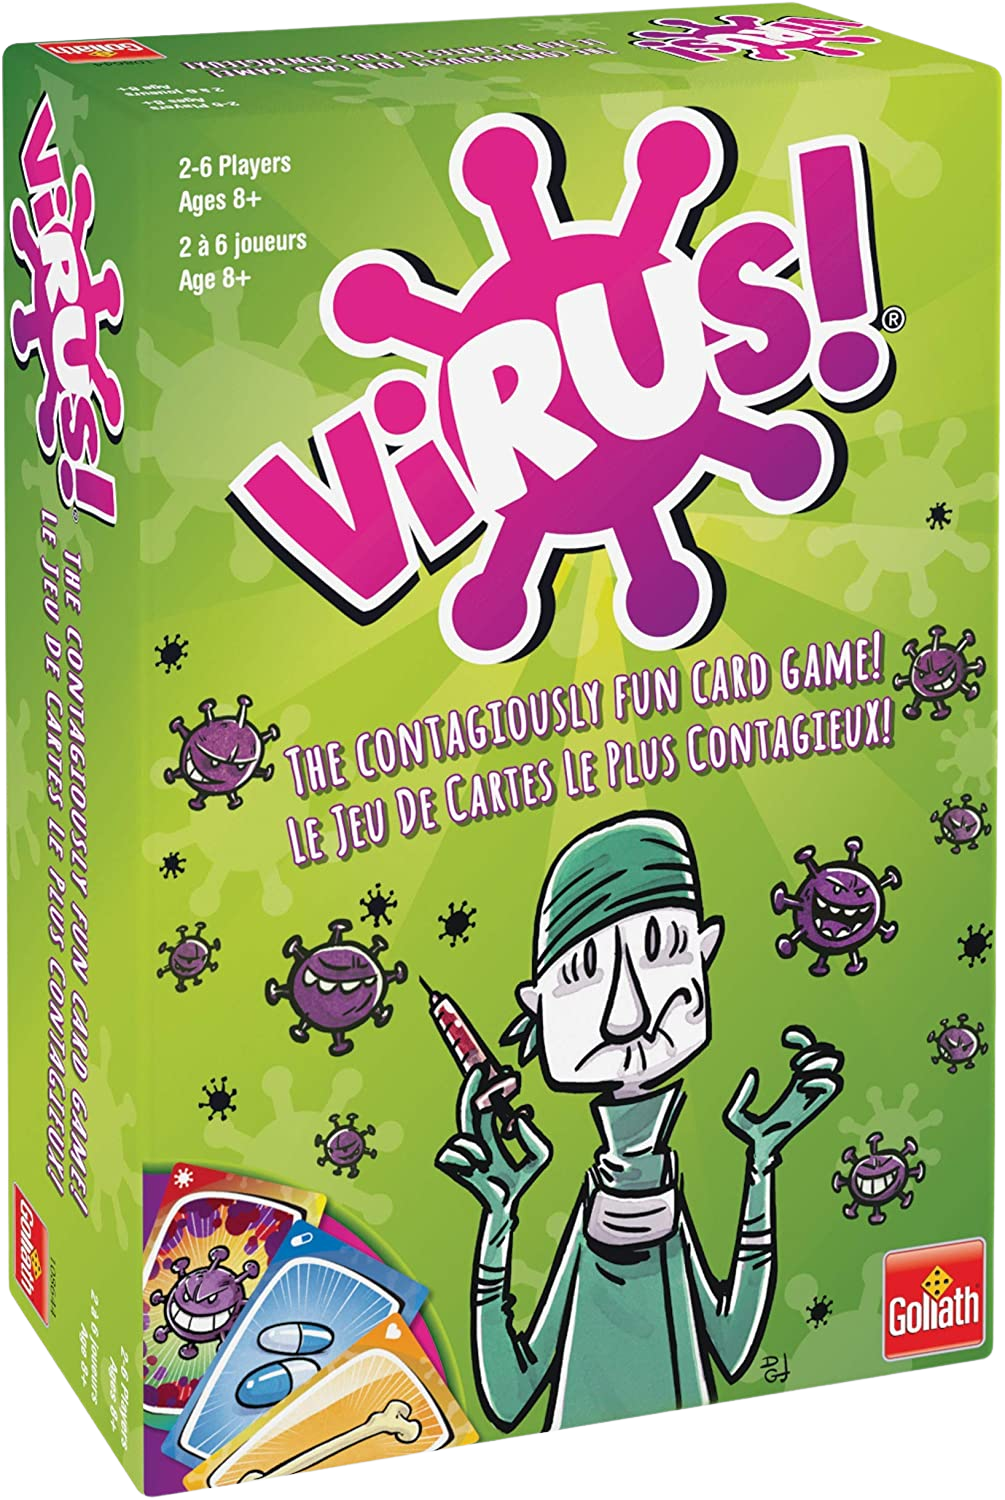 Virus contagious science card game for kids and the family